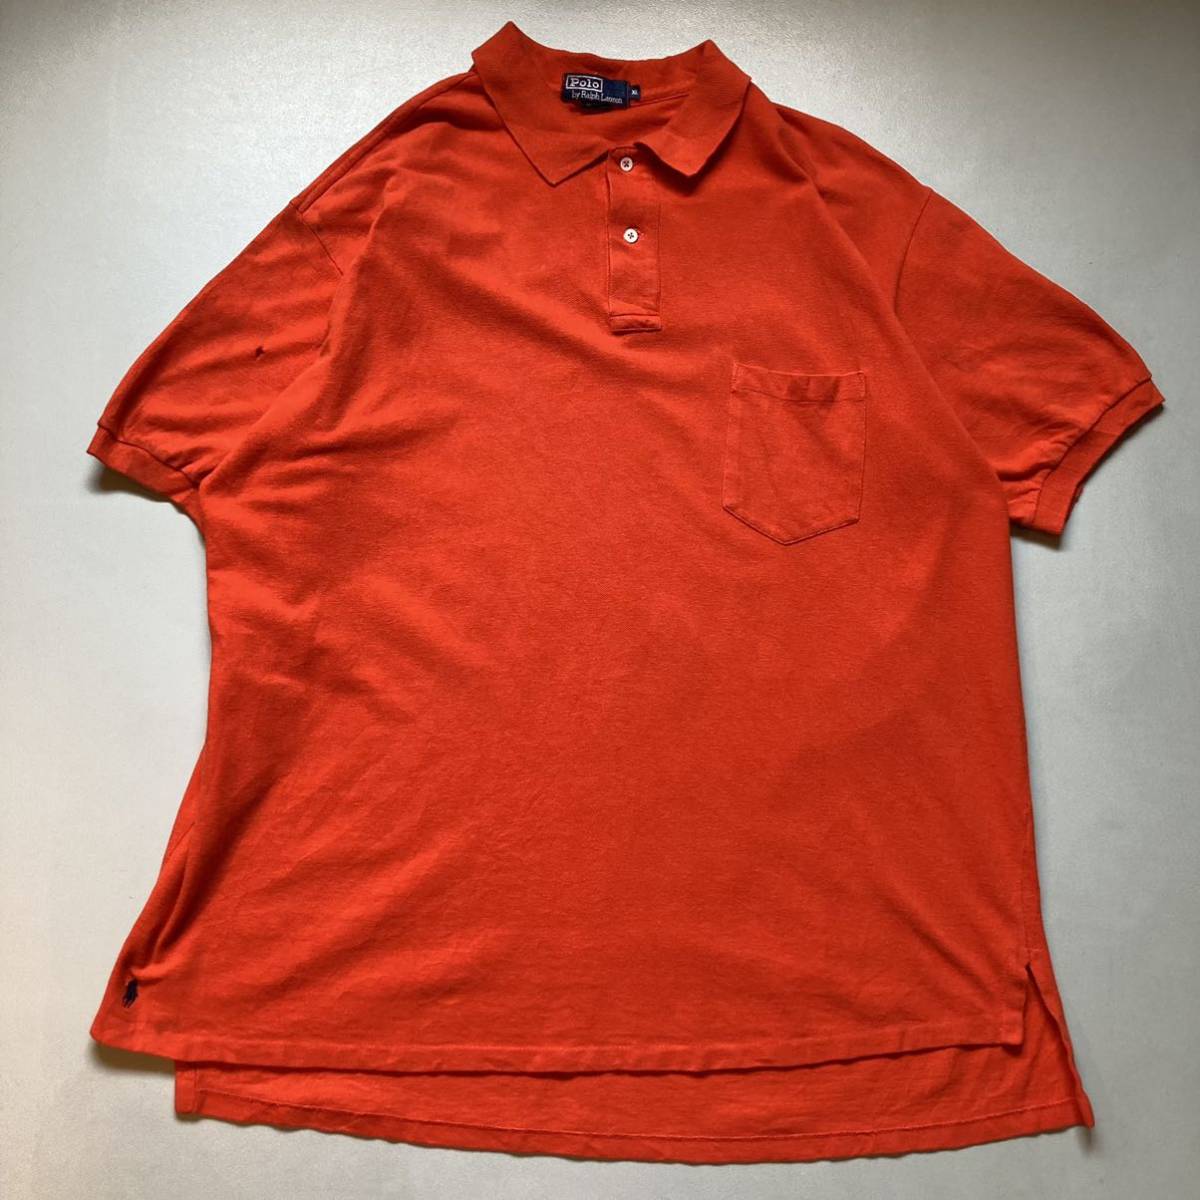 90s polo by Ralph Lauren S/S polo shirt ラルフローレン　半袖ポロシャツ　アメリカ製